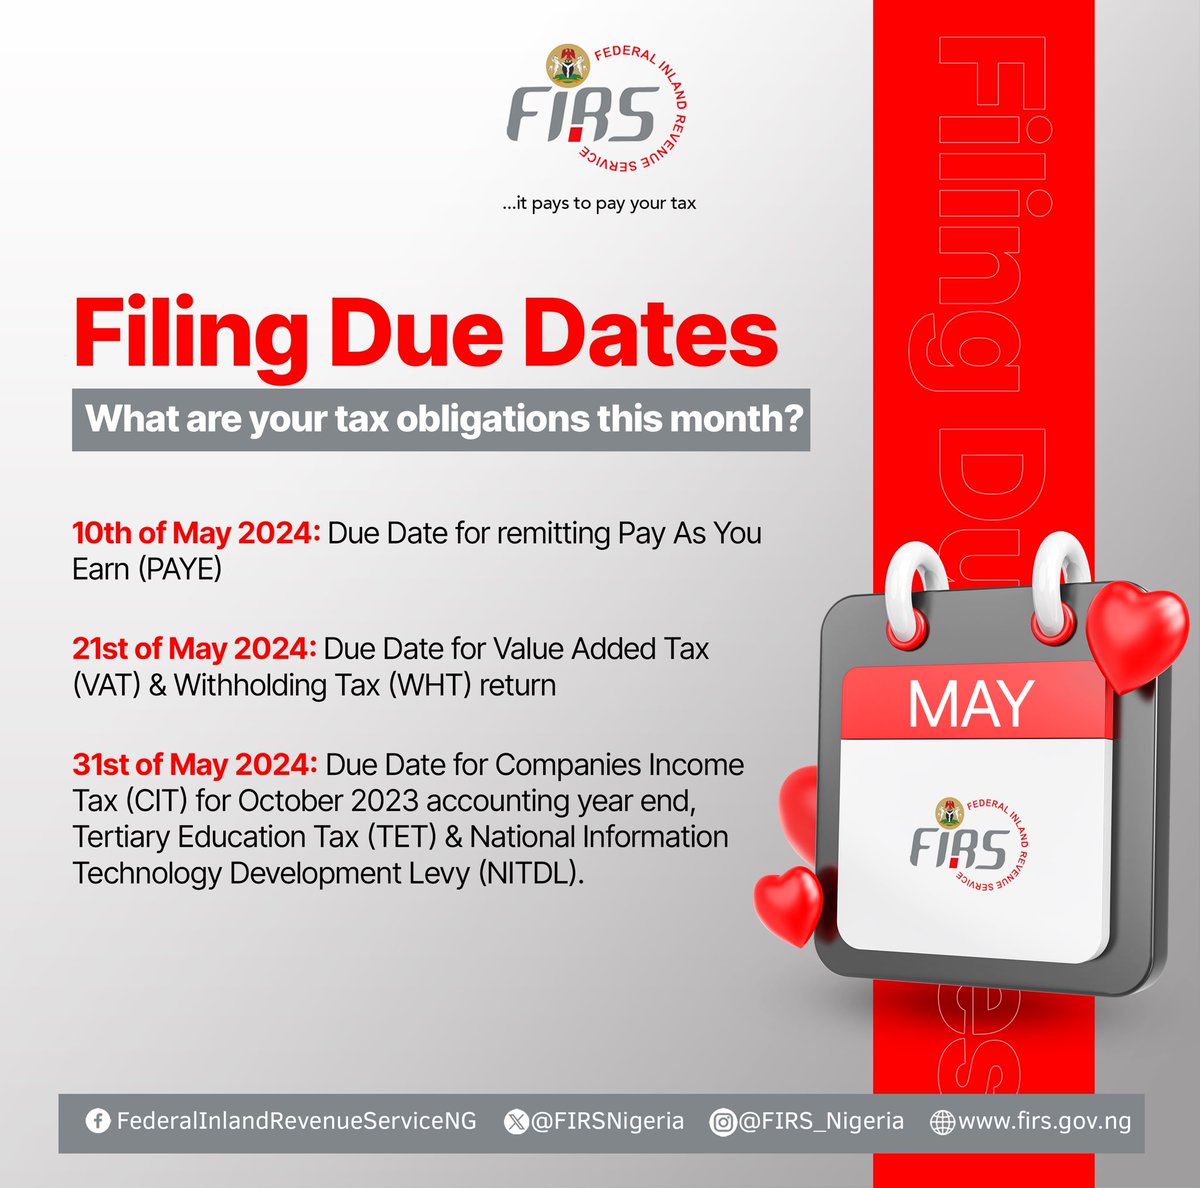 Here are some of your Tax obligations for the month of May. Take note of the filing due dates for the various tax types. 🗓️